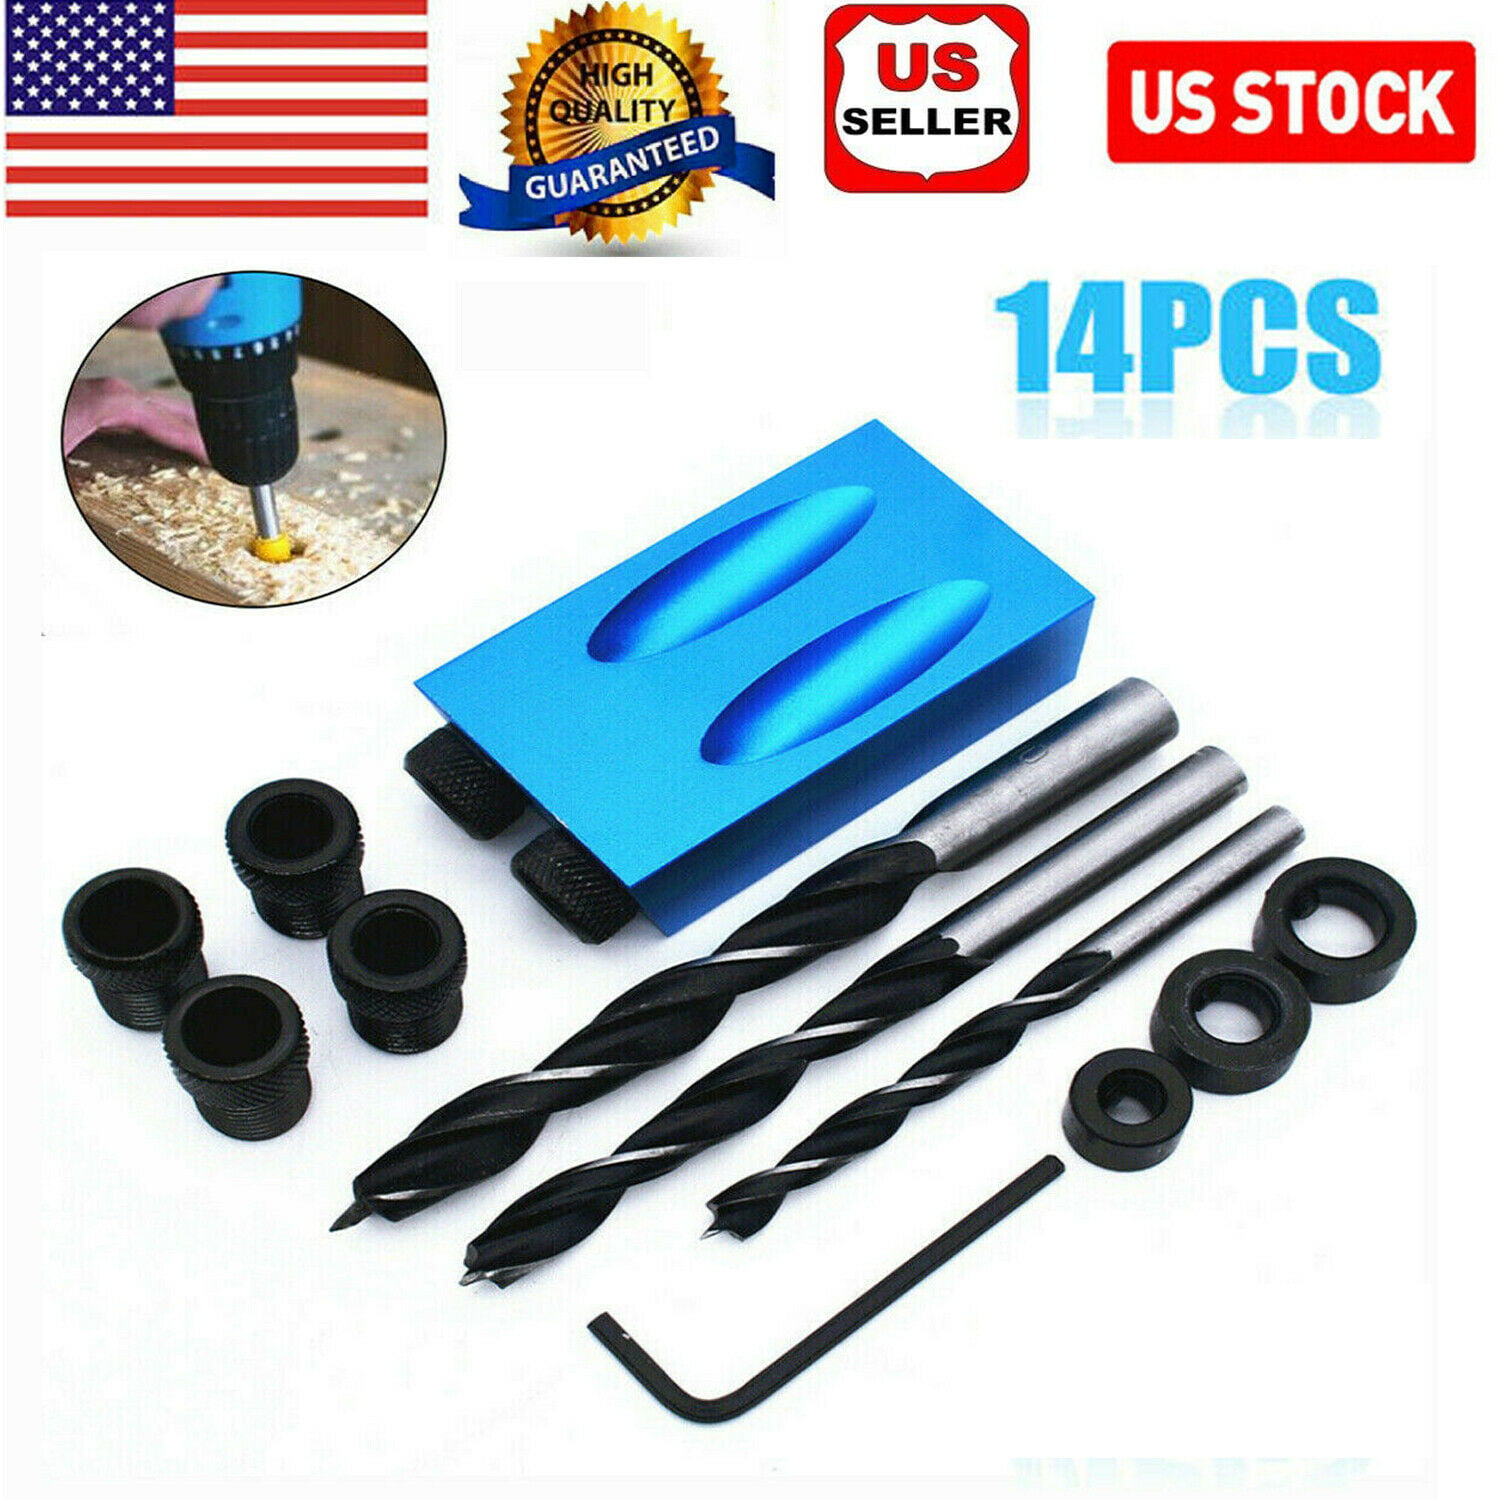 1Set Pocket Hole Jig Kit 850 Easy Tool System Woodworking Screw Drill FLA